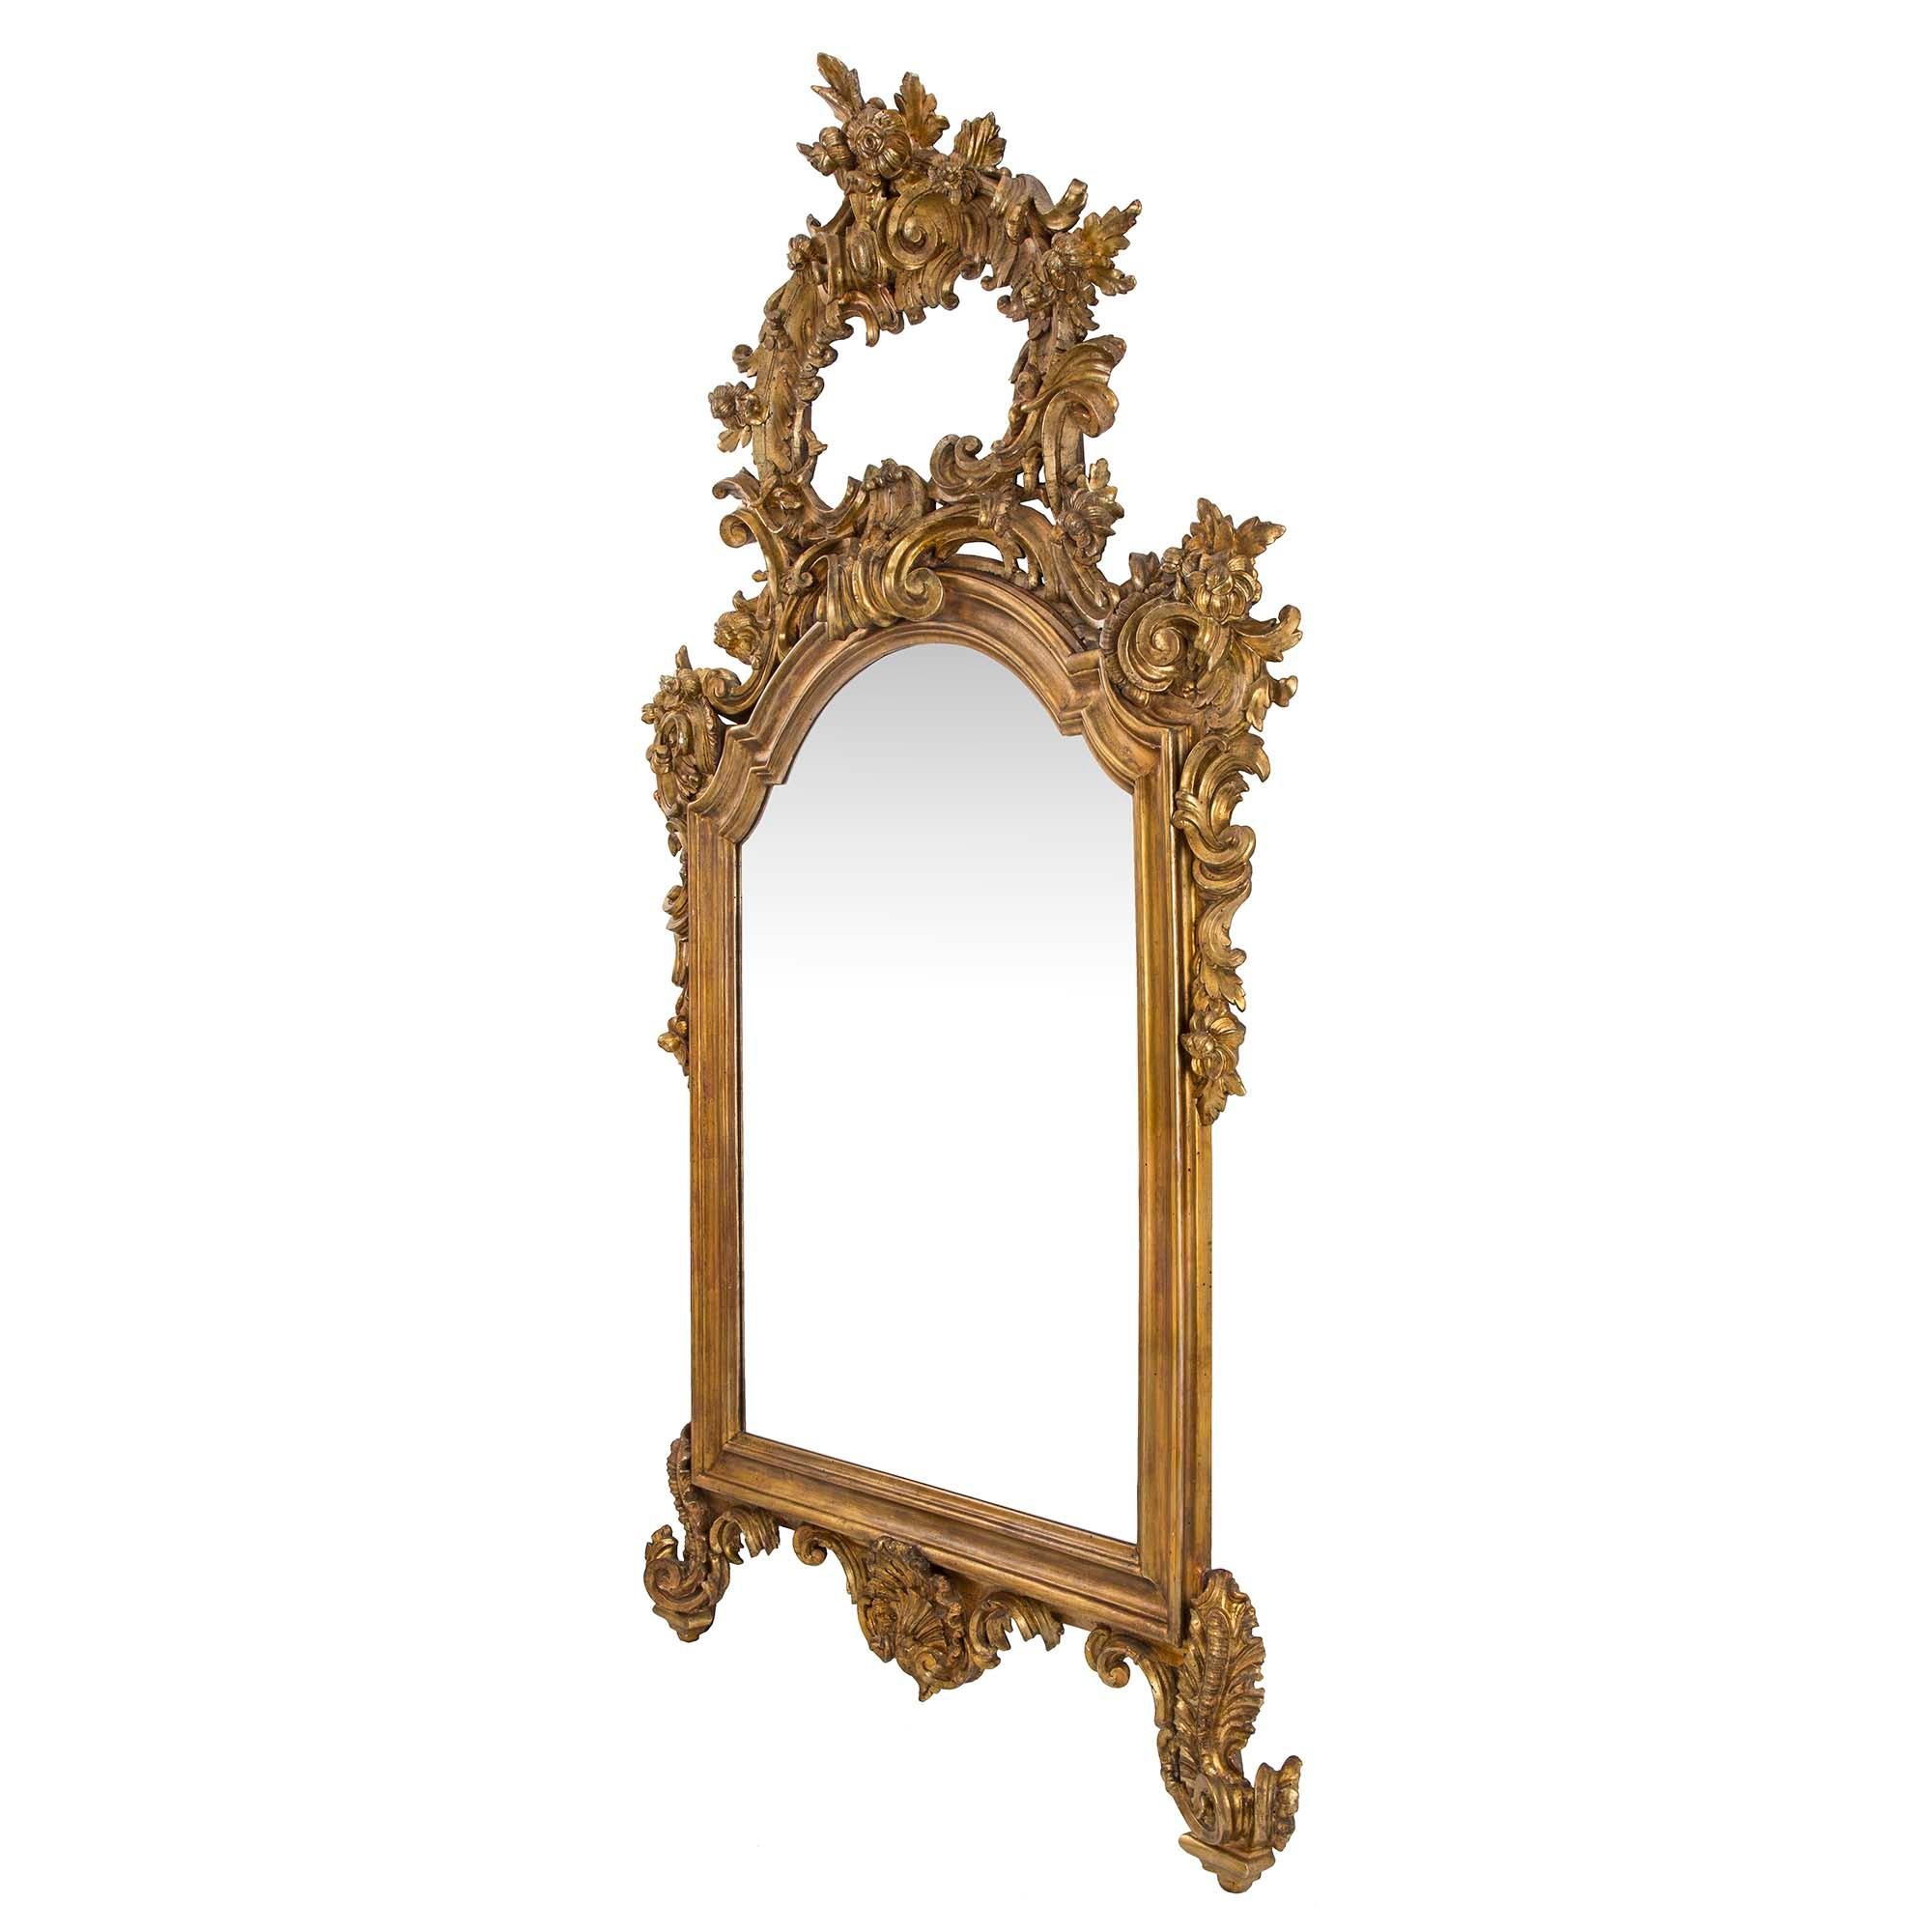 A magnificent pair of Italian 19th century Louis XV st. finely carved mecca mirrors. Each mirror is raised by most elegant and richly carved scrolled foliate feet centering a fine seashell reserve. At the center are the original mirror plated framed